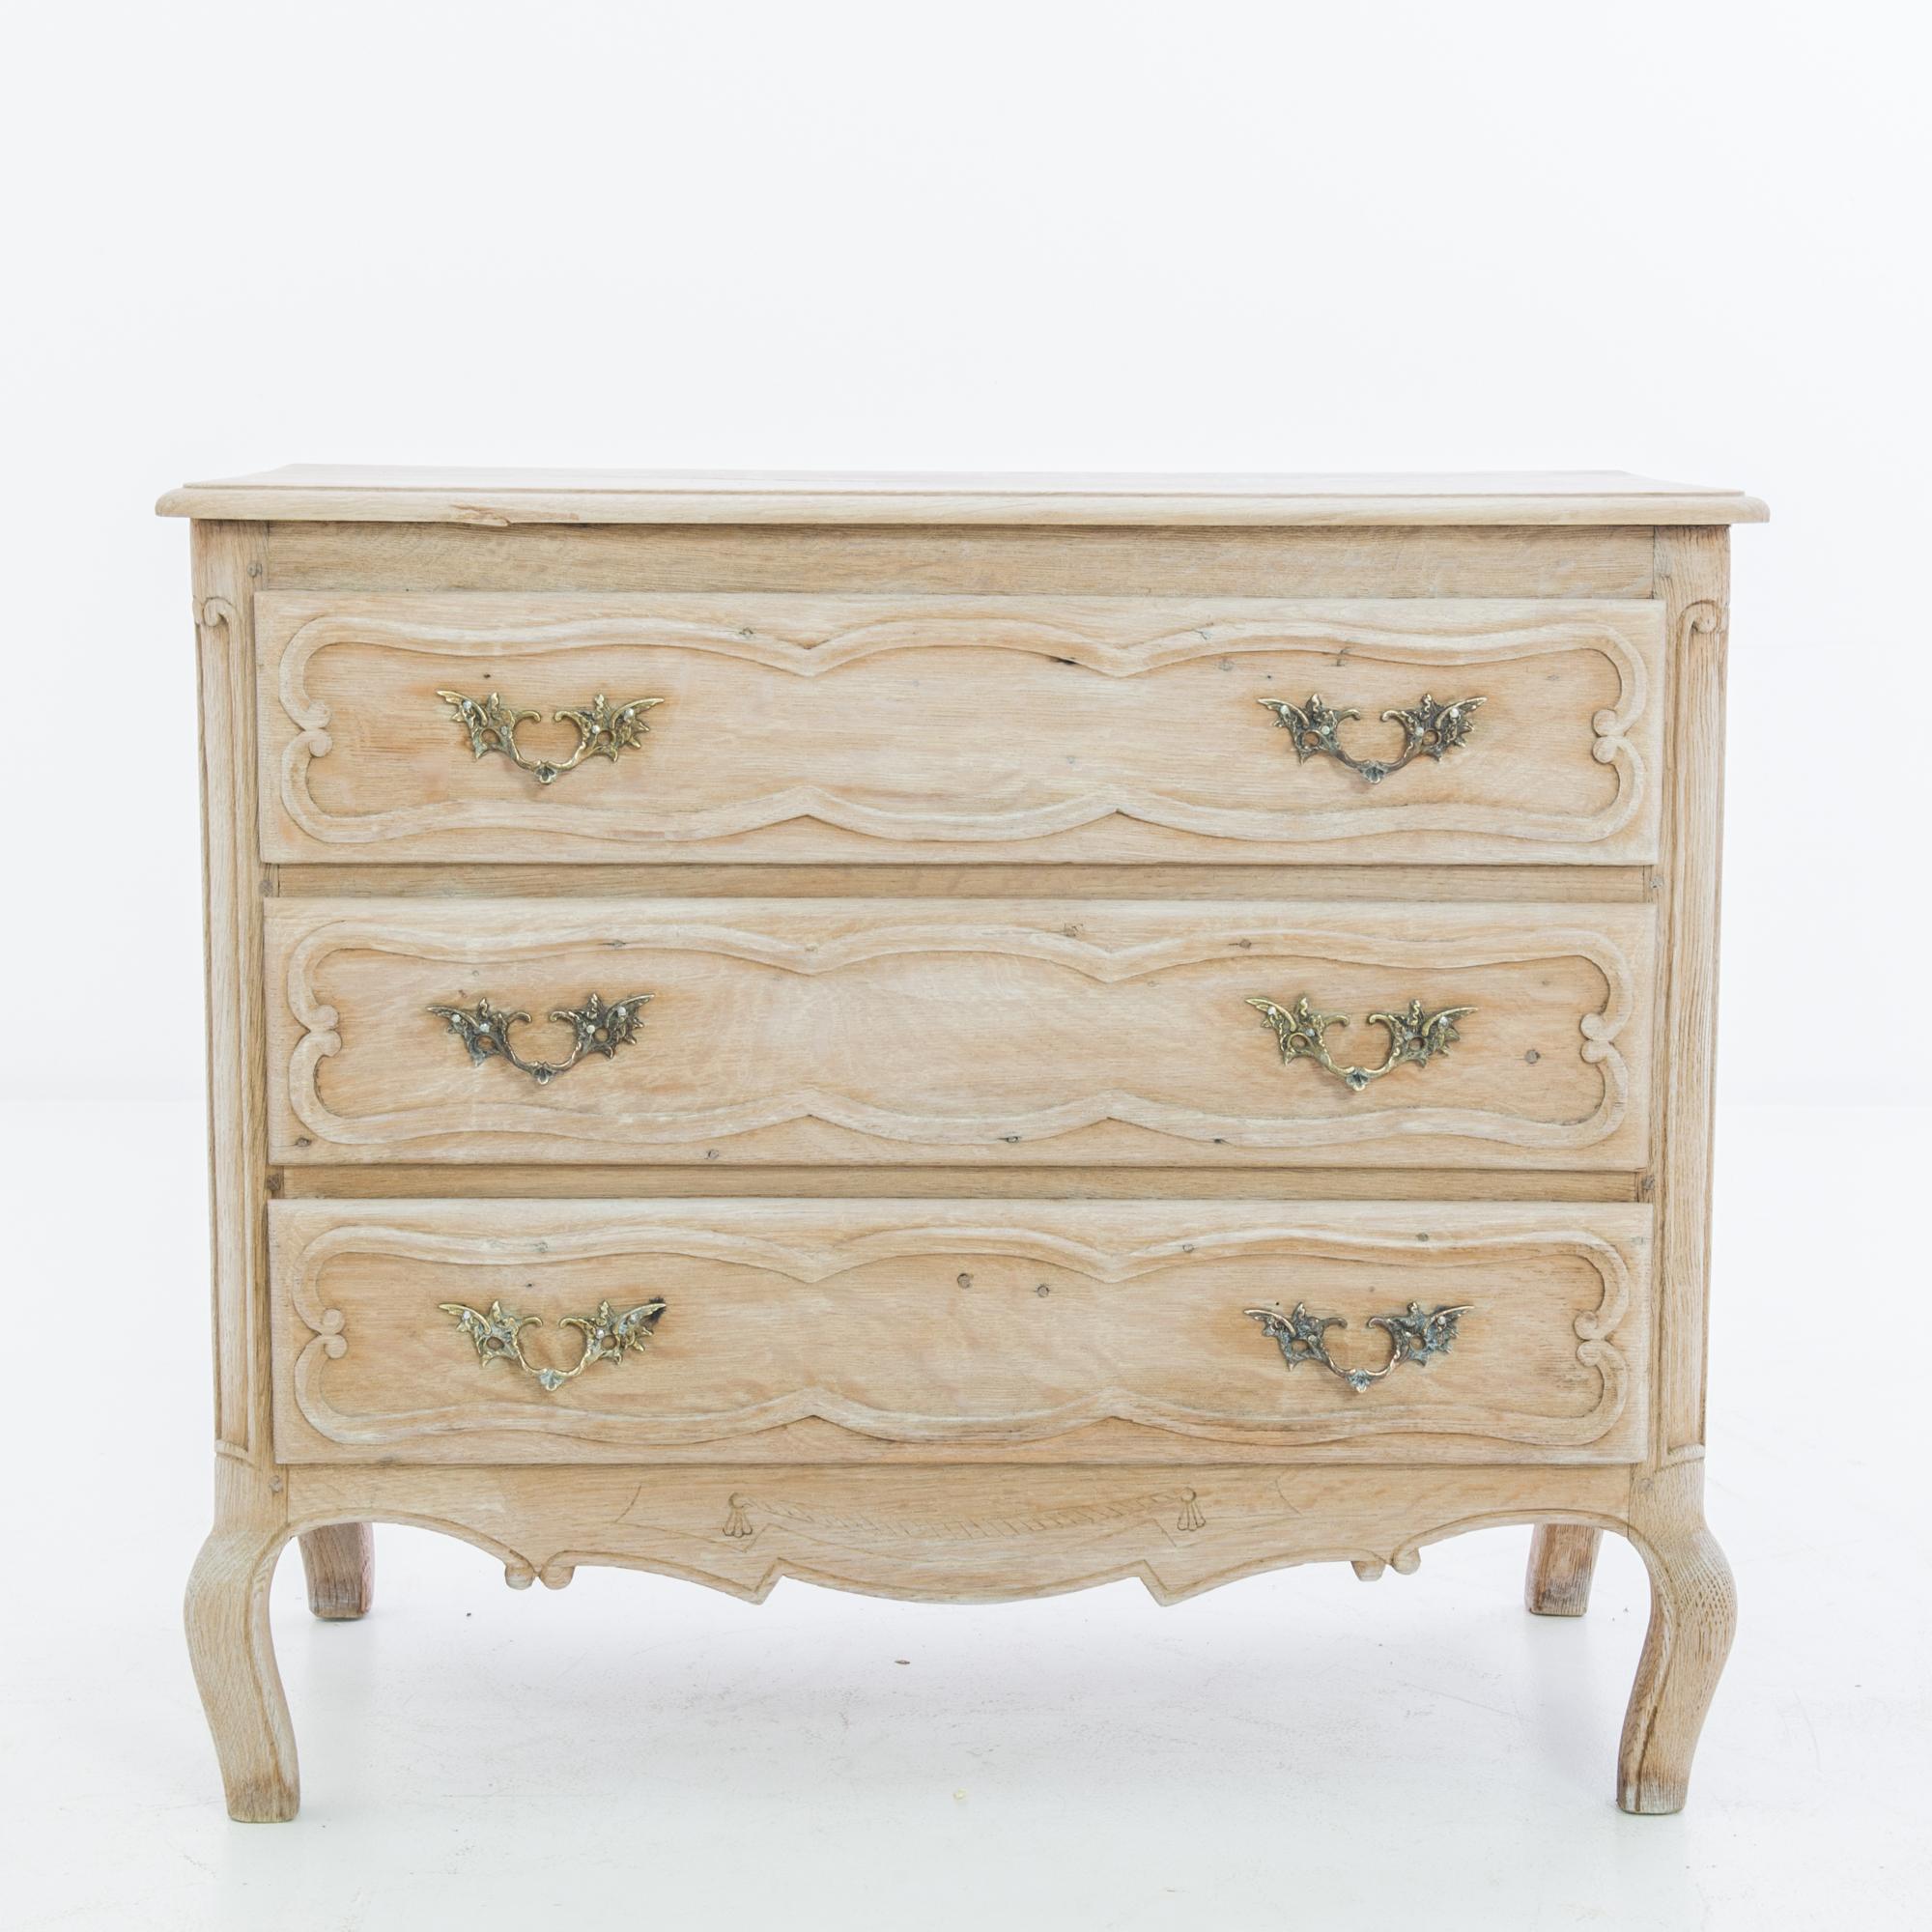 A three drawer oak chest from France, circa 1950. The wood has been restored in our workshops to a pale finish, revealing the natural rose tone of the oak. A lively pattern of carved scrolls dances across the apron; cabriole feet lend elegant